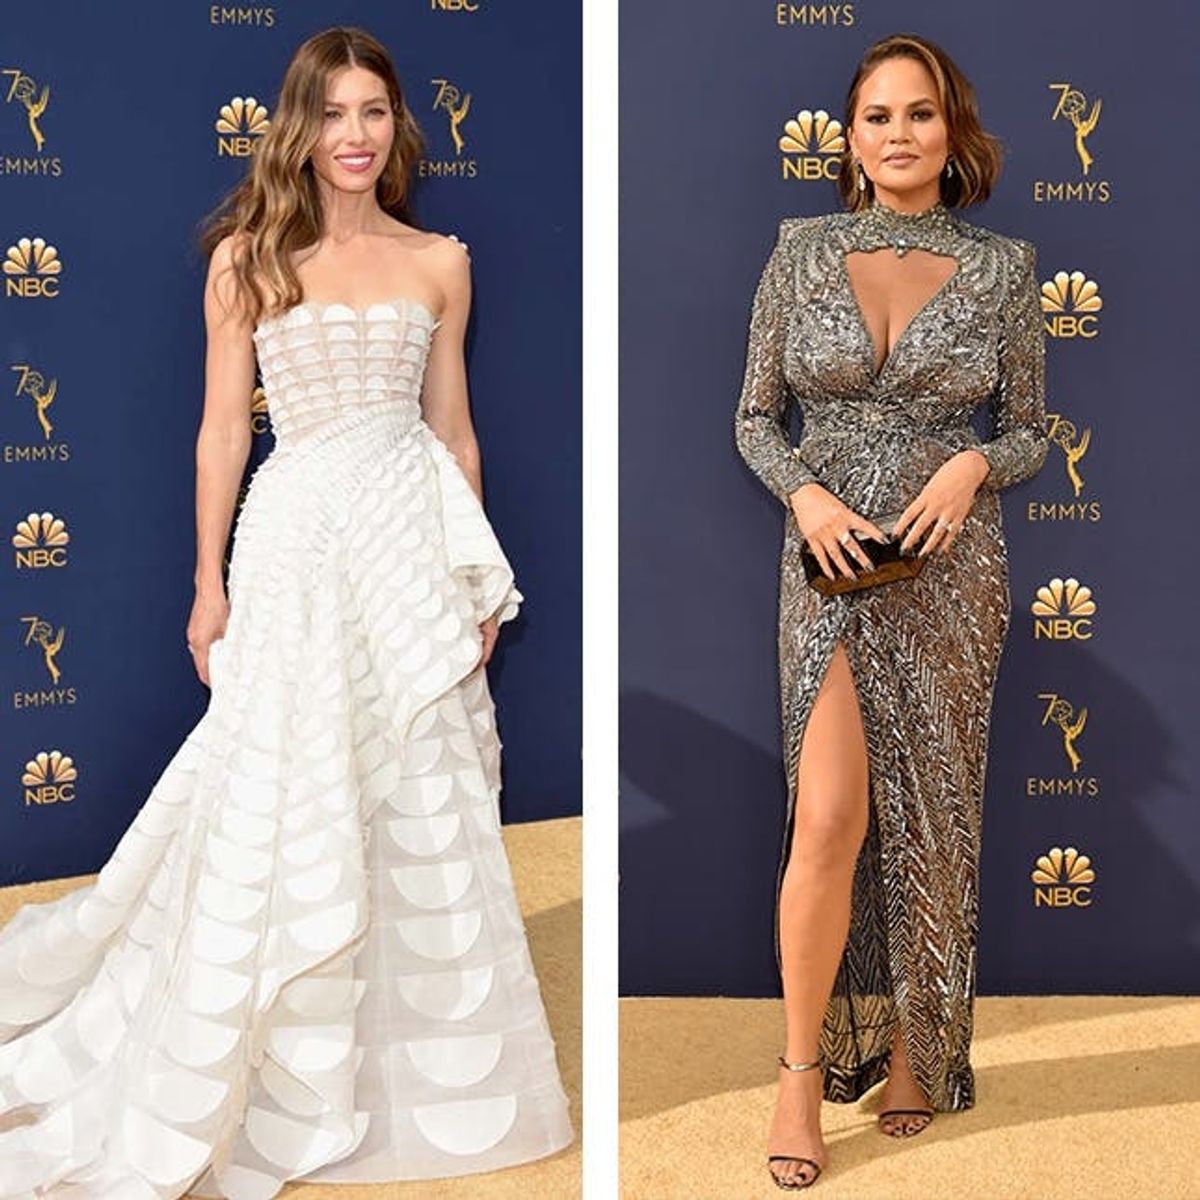 The Only Looks That Matter on the Emmys 2018 Red Carpet